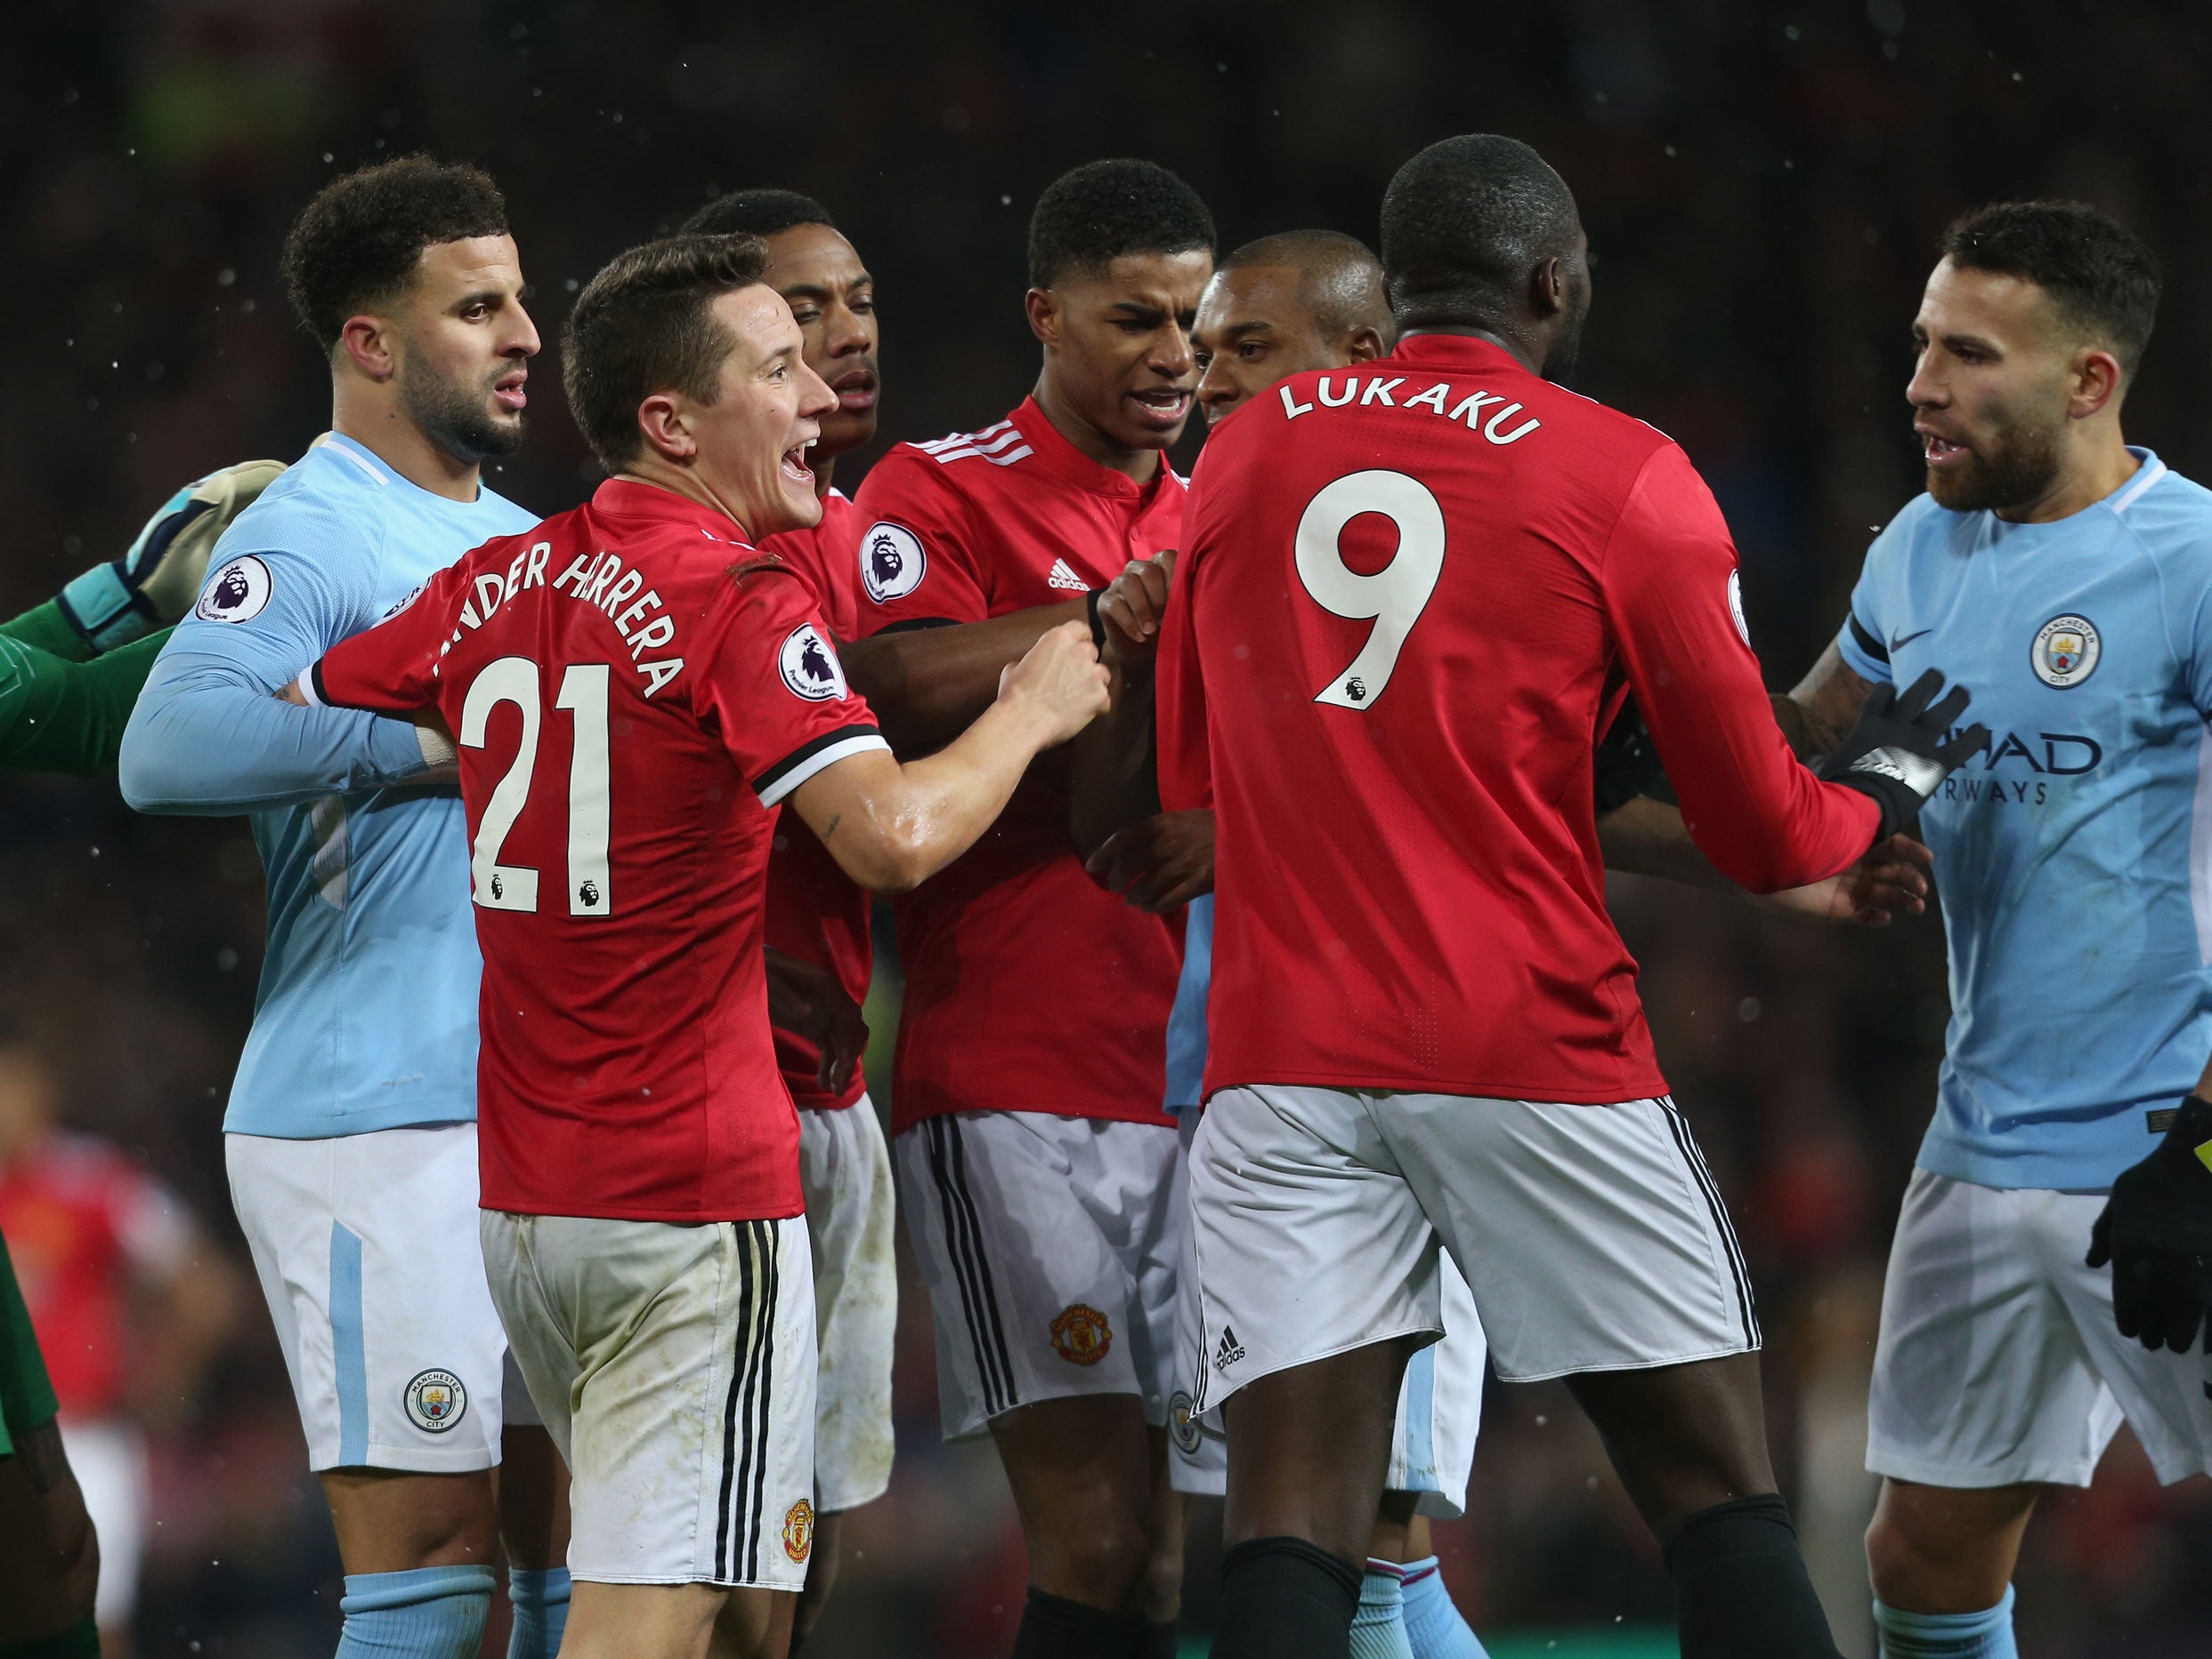 Manchester United and Manchester City players clashed after a fiery derby